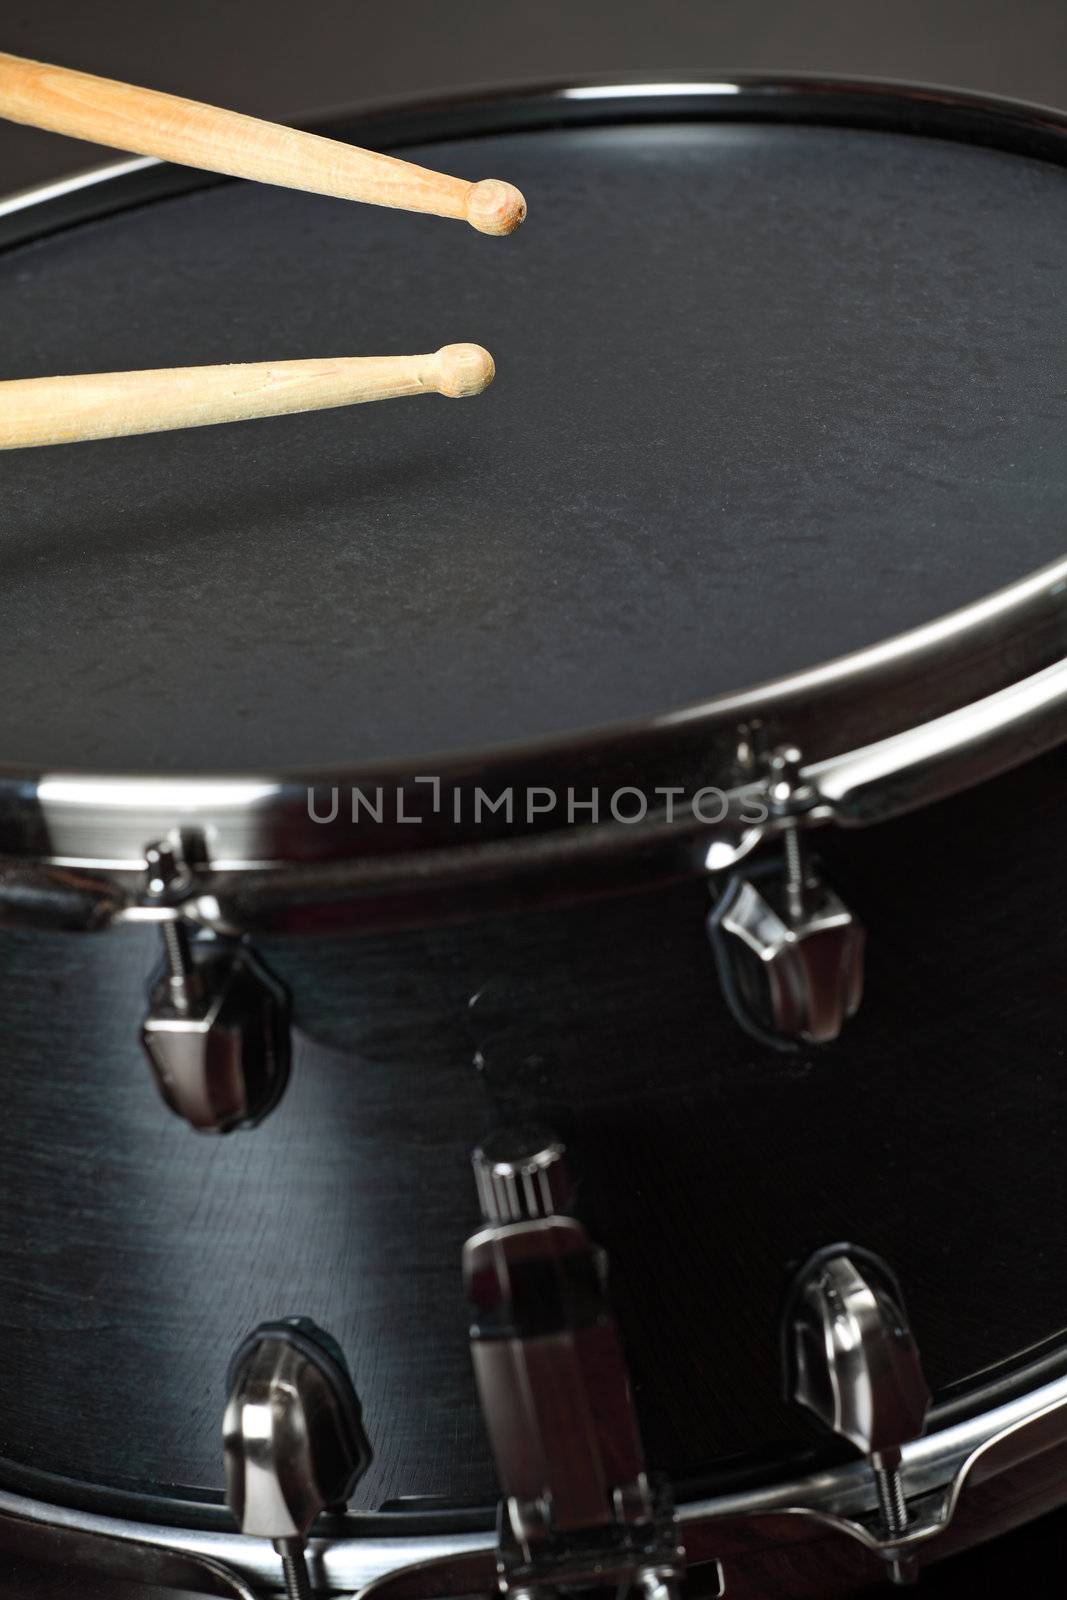 Wood snare drum by sumners